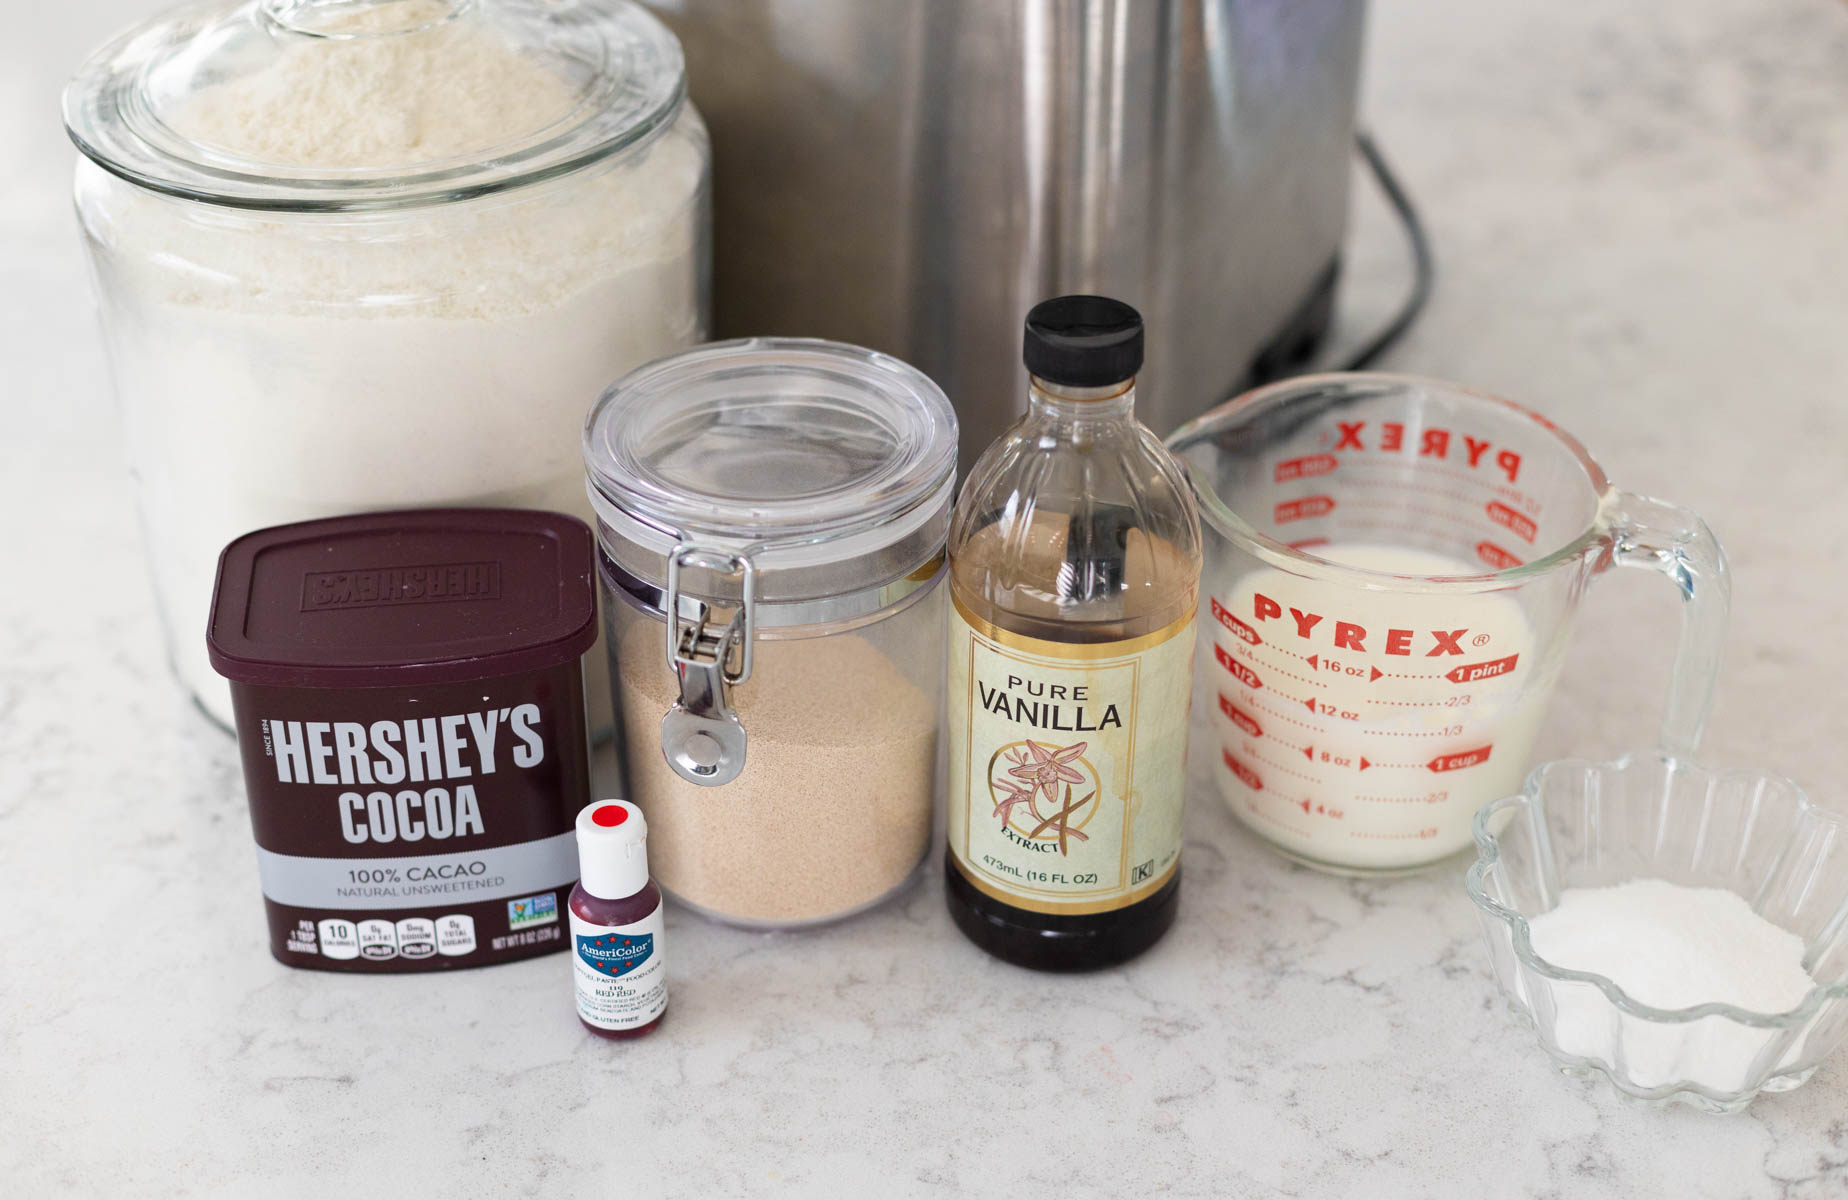 The ingredients to make red velvet cinnamon rolls are on the counter.